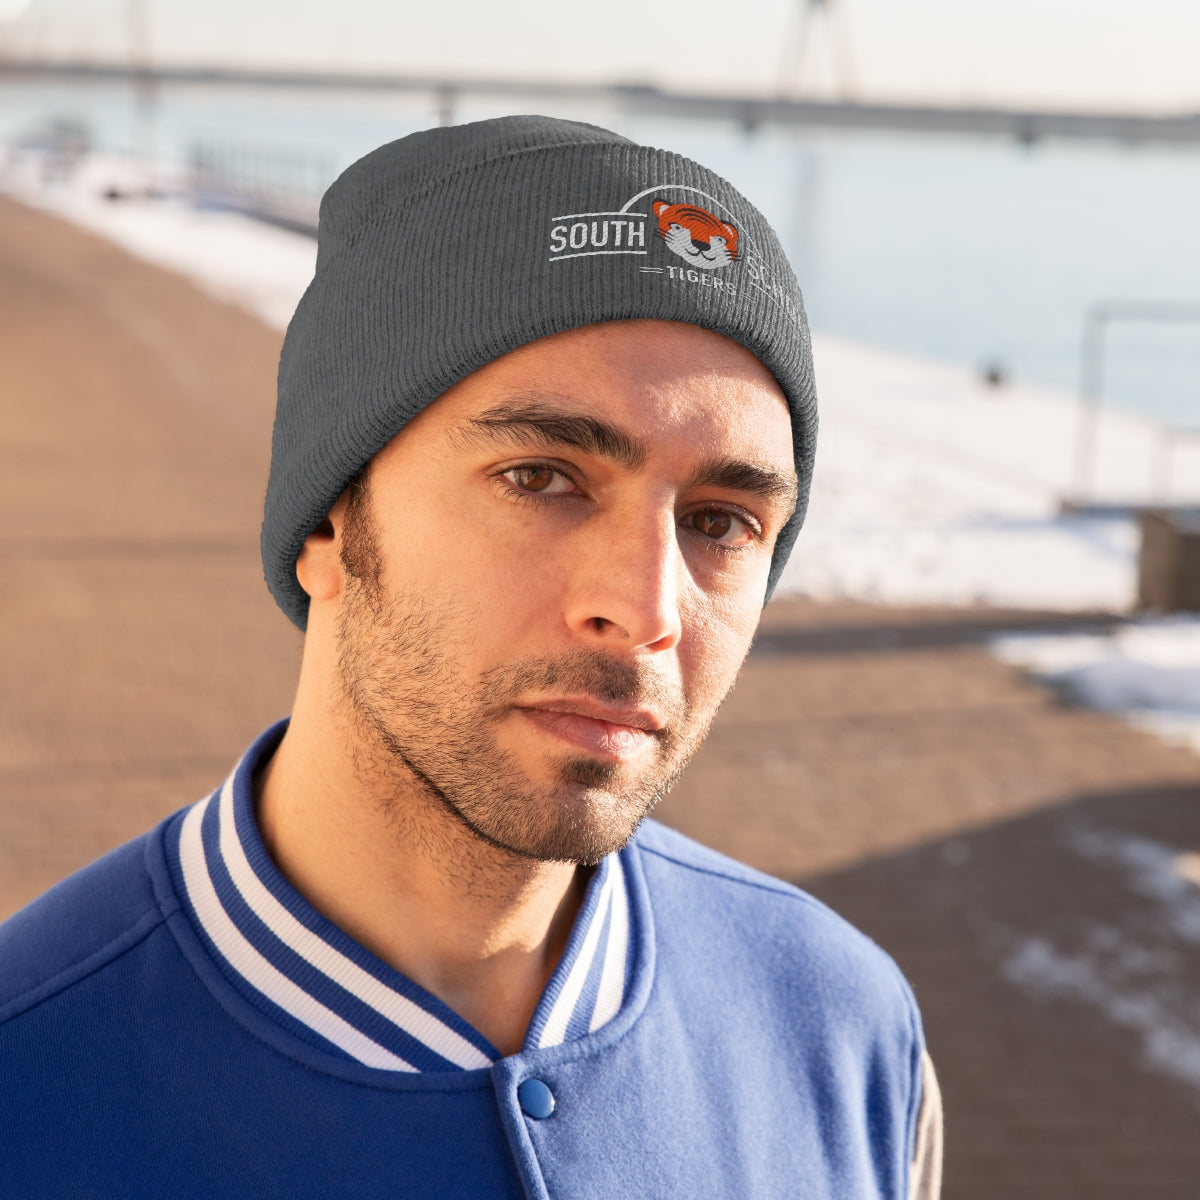 South Tiger Knit Beanie (Multiple Colors Available)